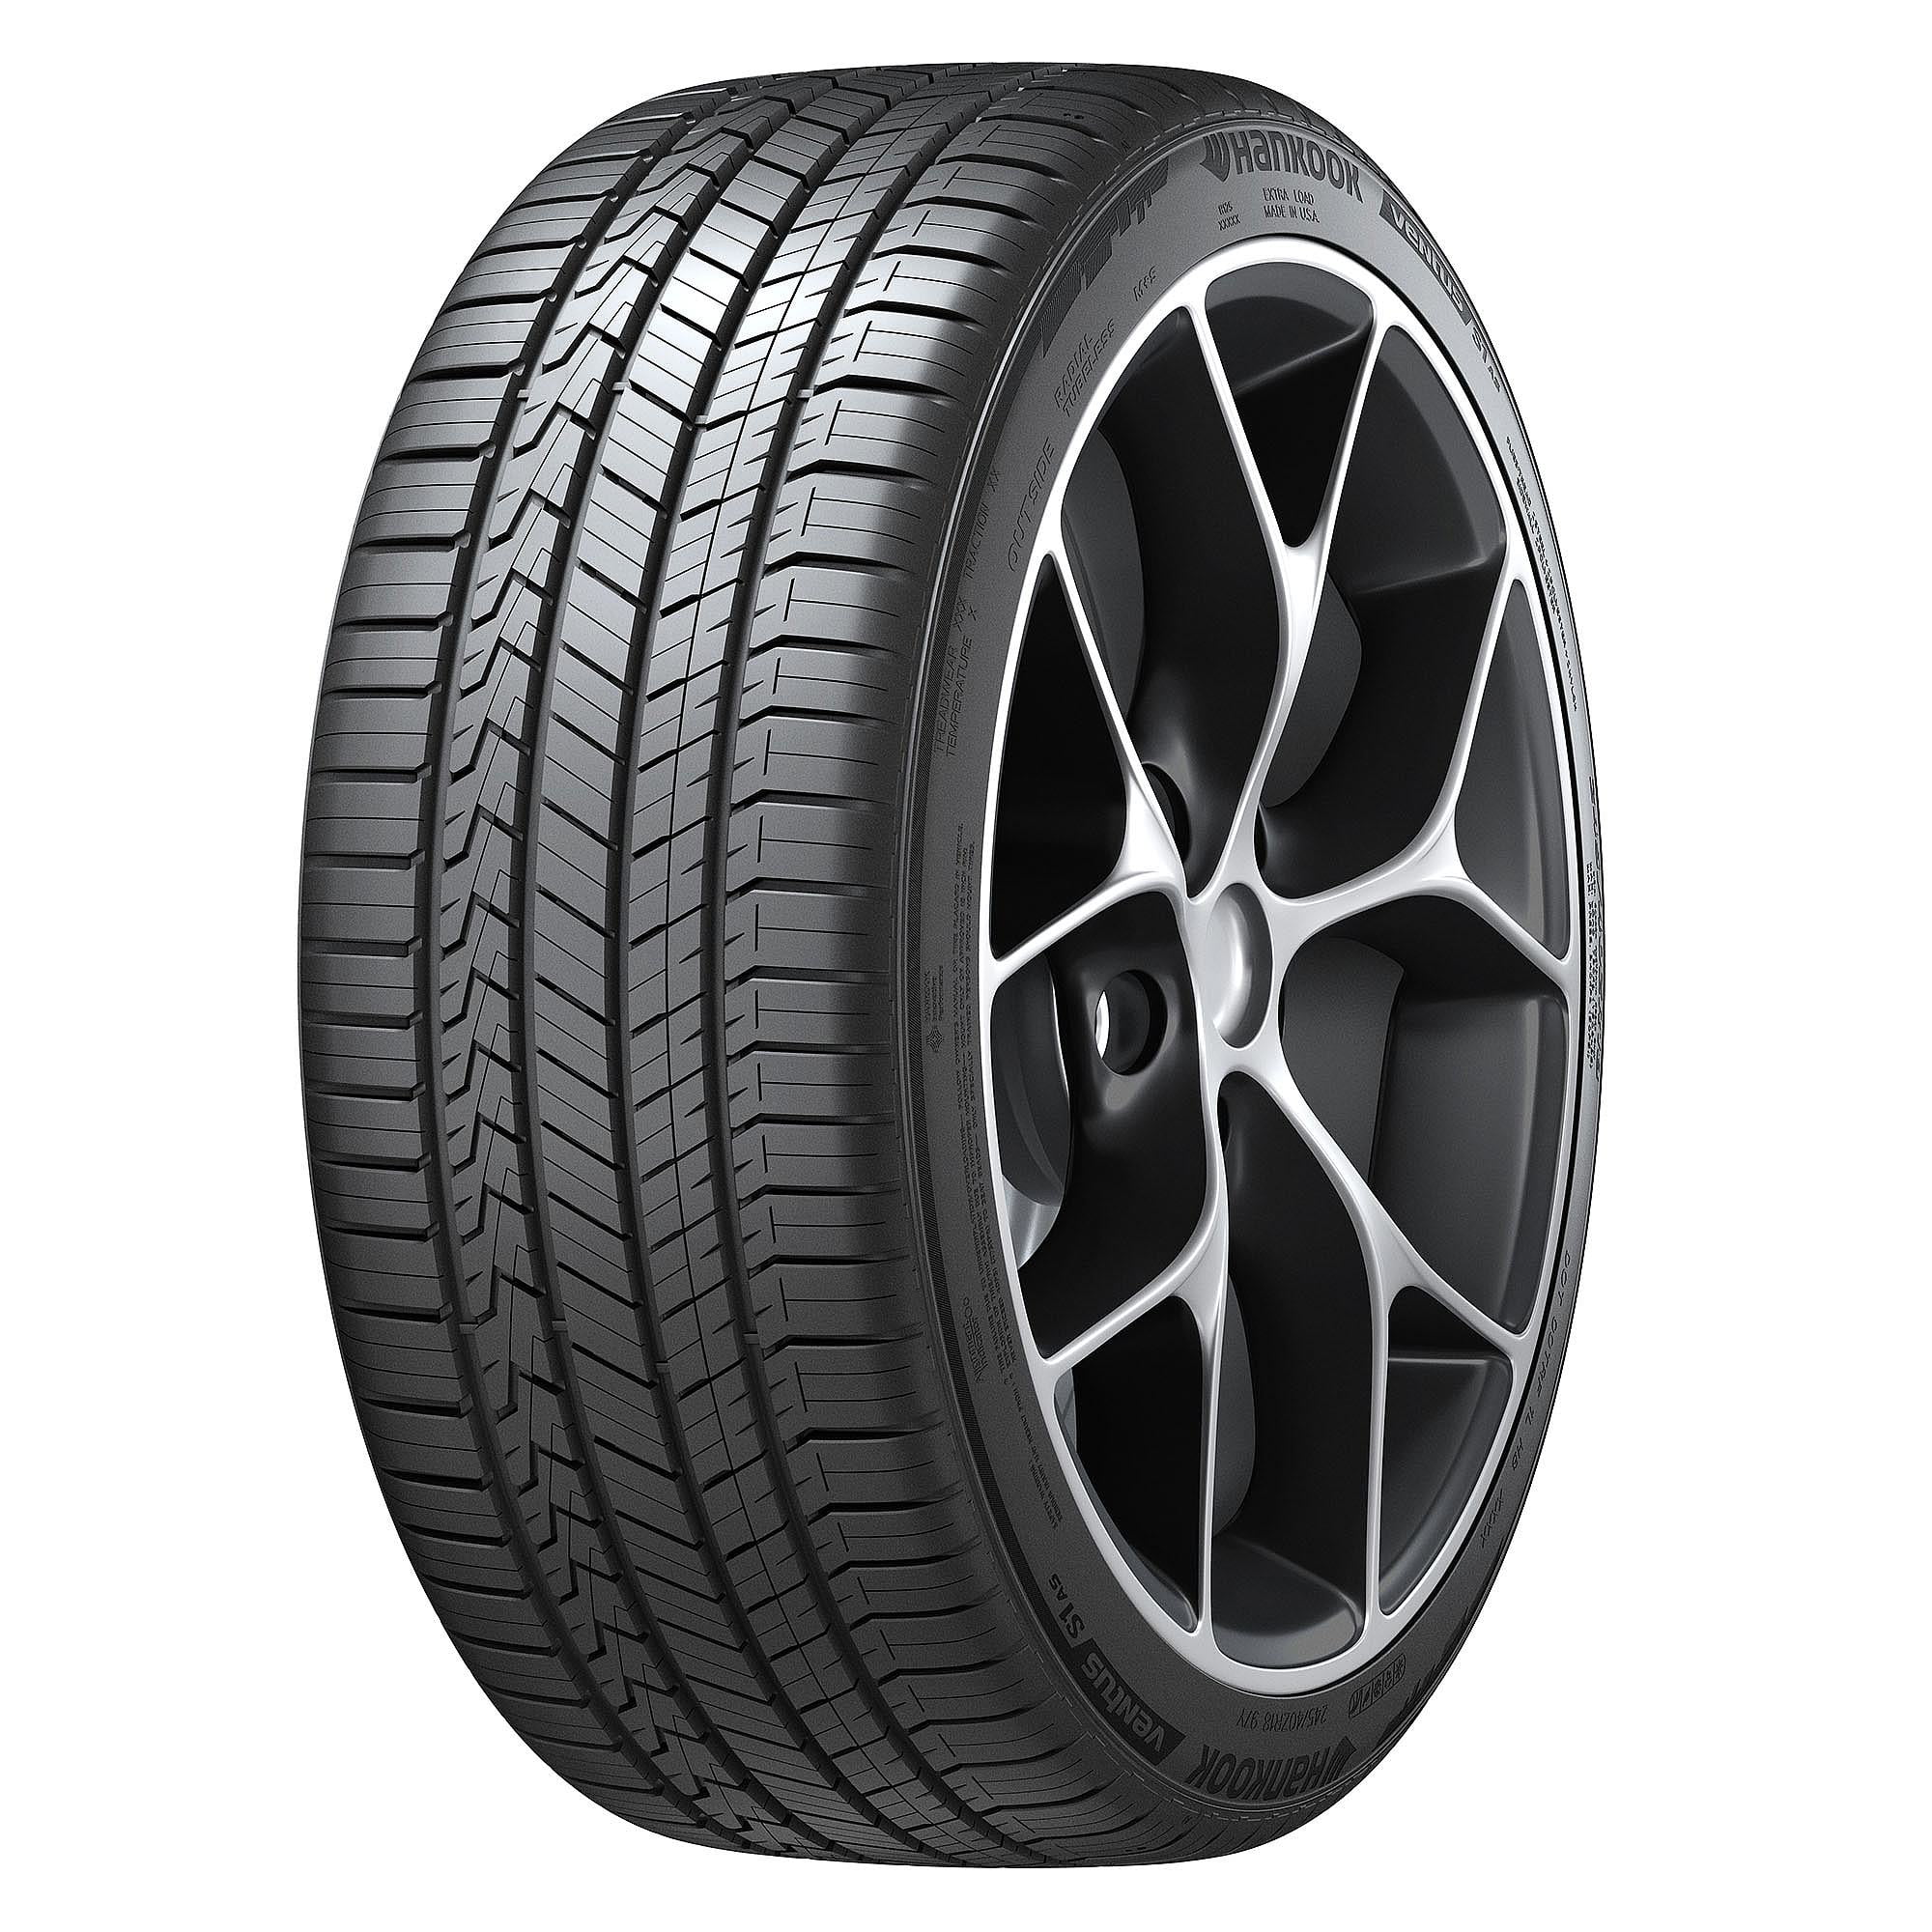 Hankook Ventus S1 AS (H125) UHP 245/45ZR19 102Y XL Passenger Tire